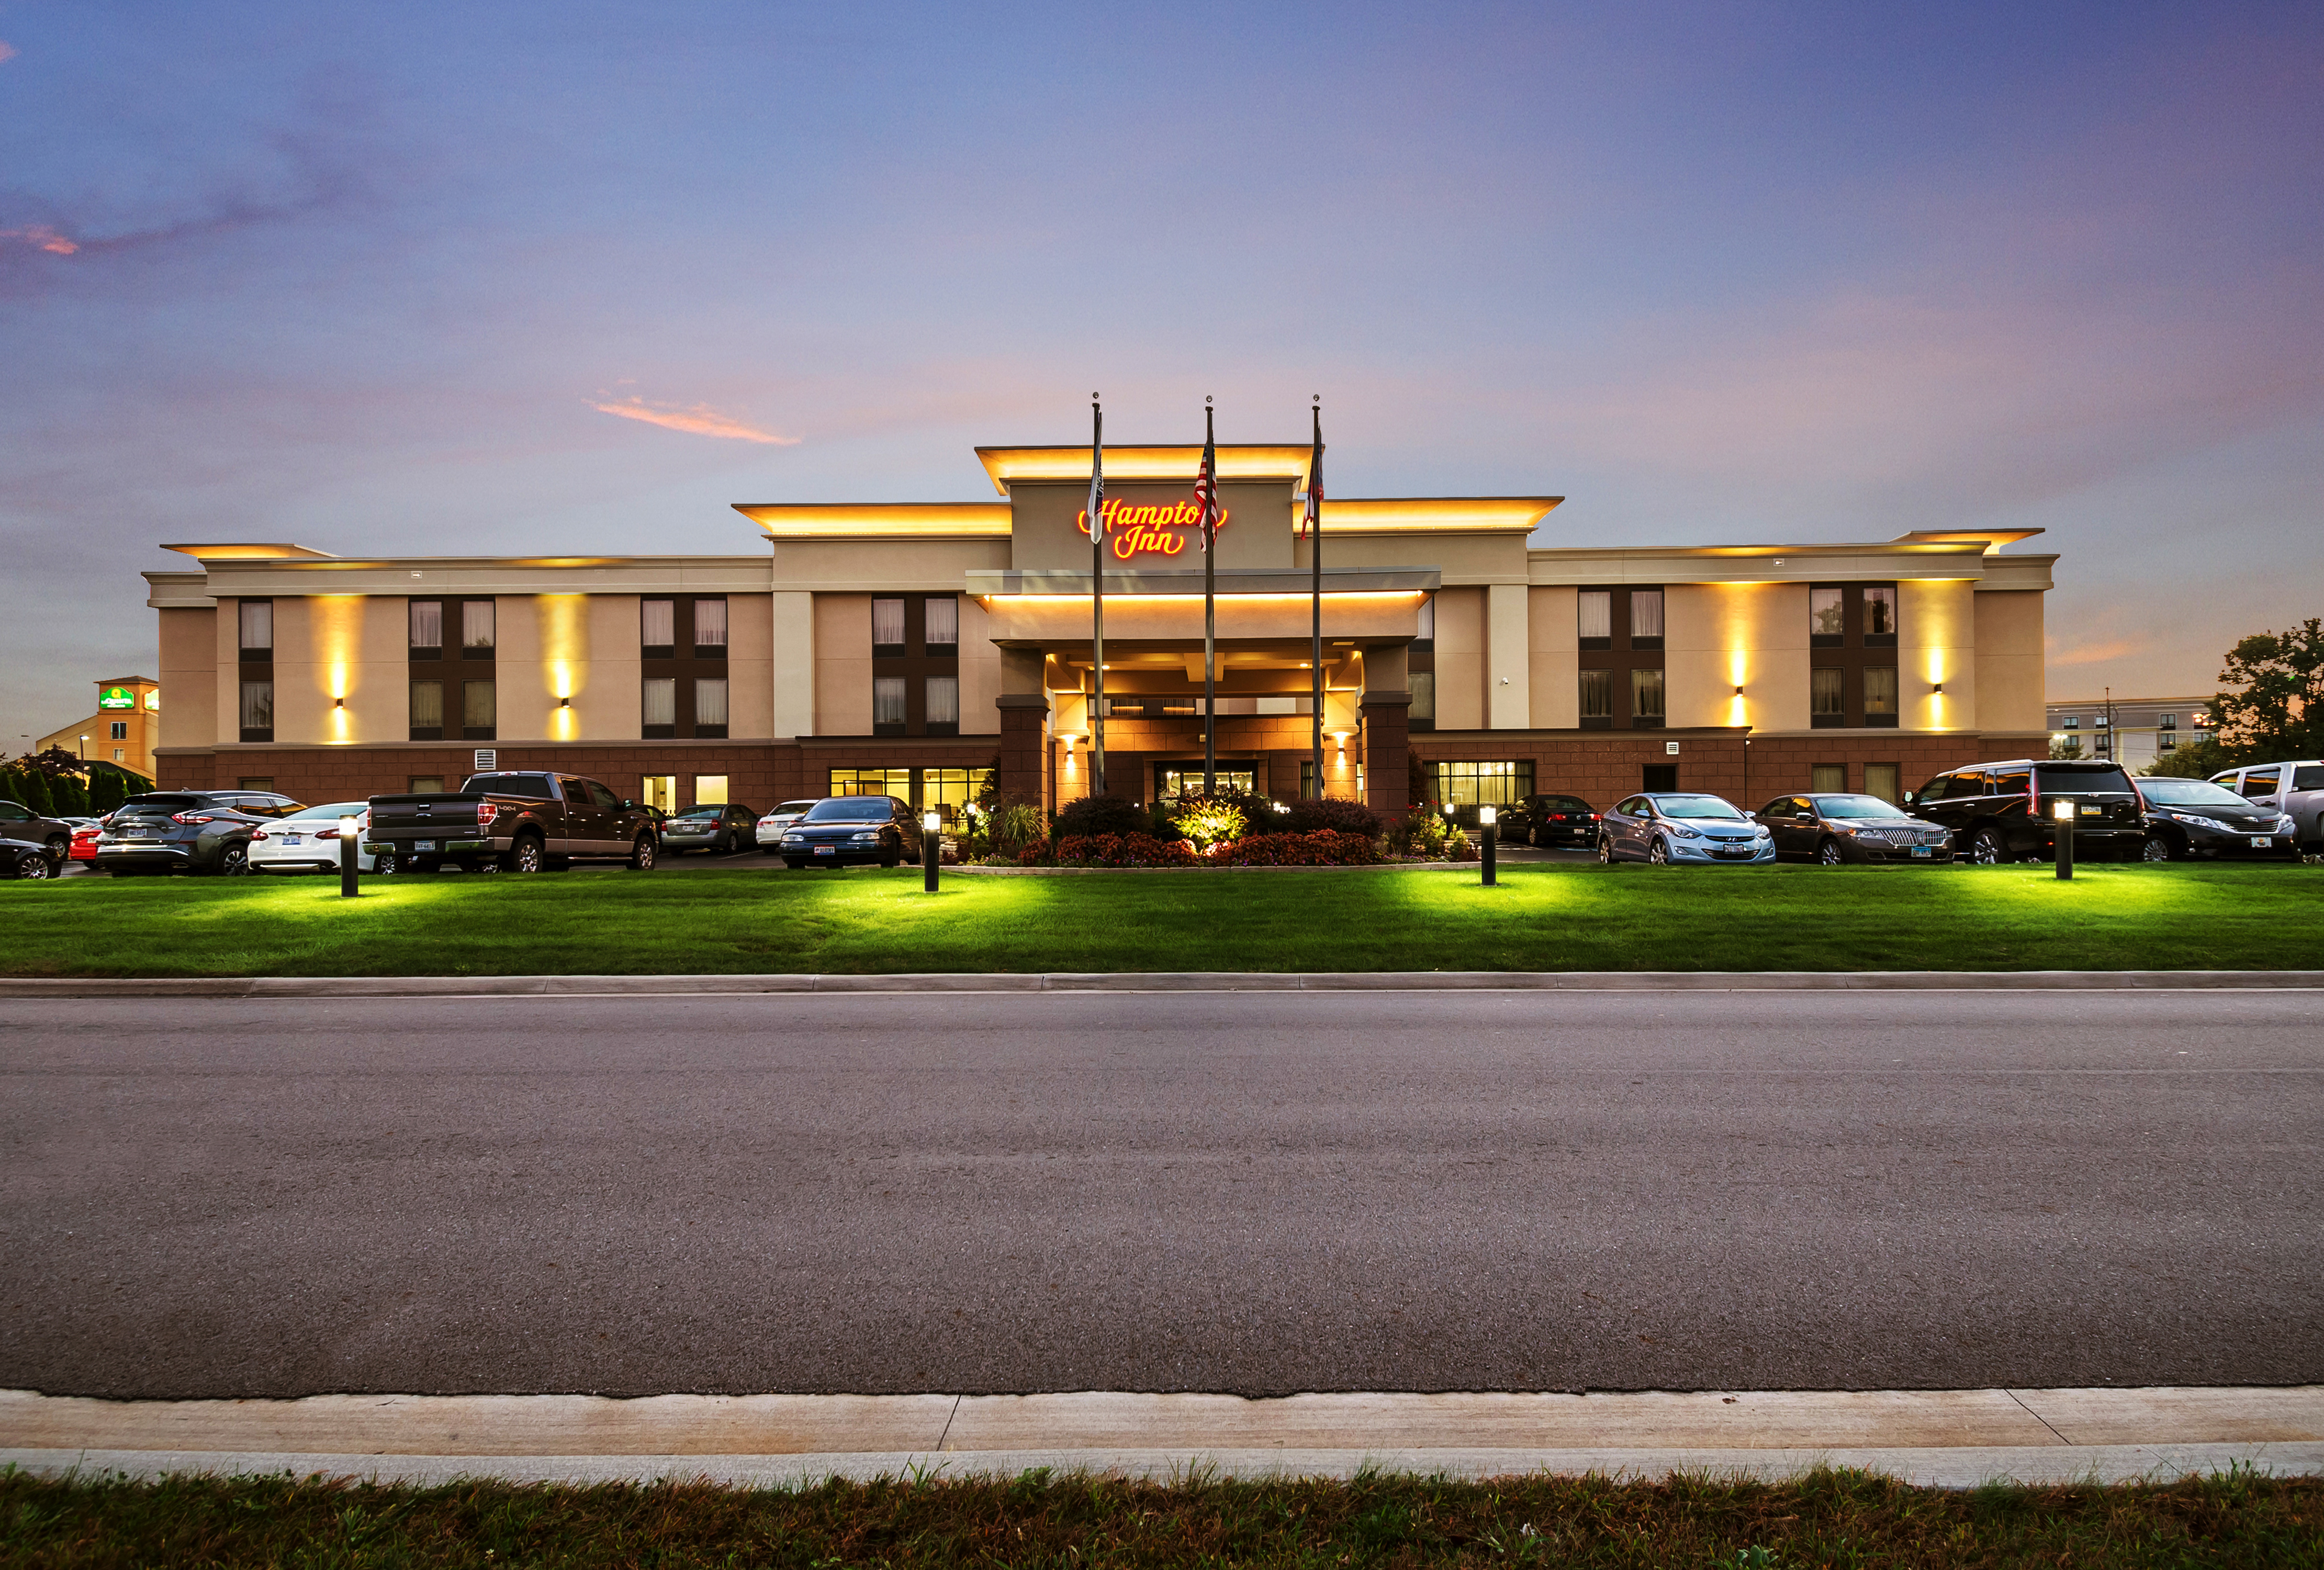 Hotel exterior with cars